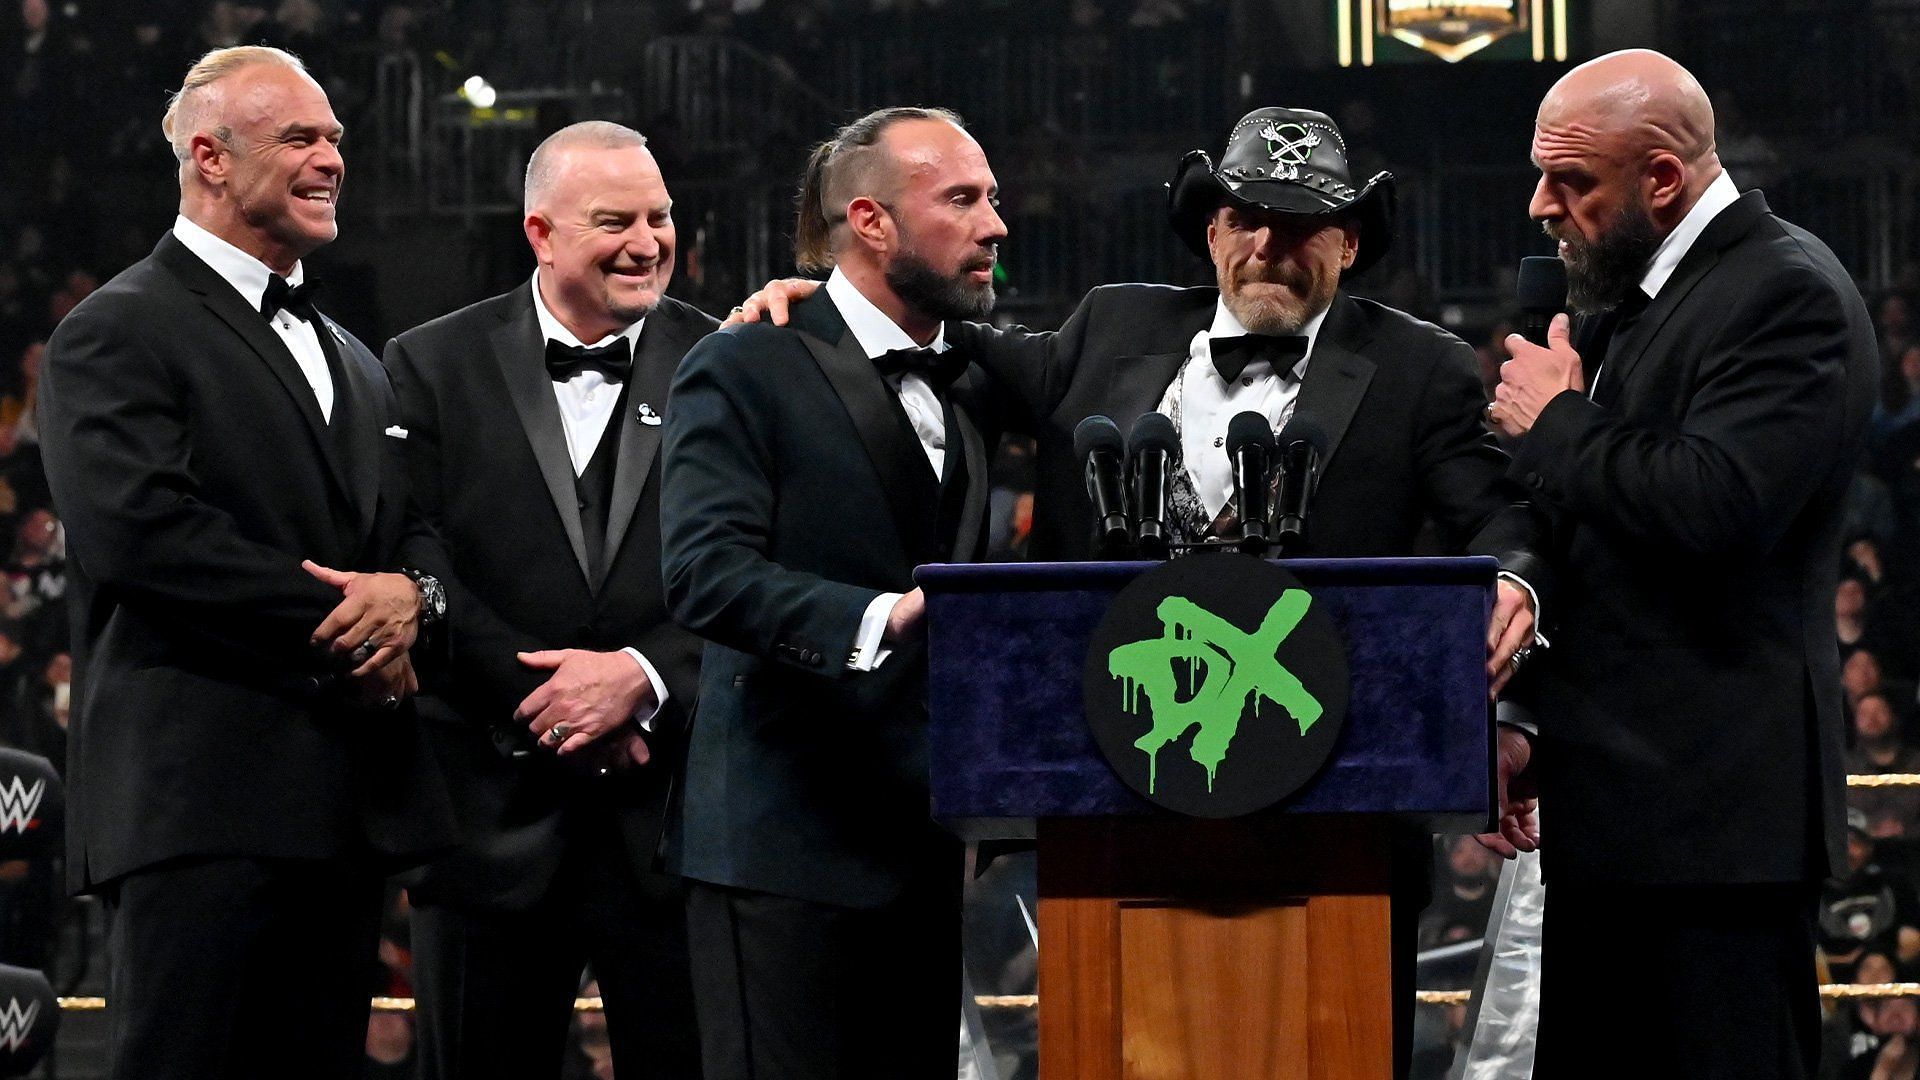 DX was one of the best factions back in the day, alongside the nWo